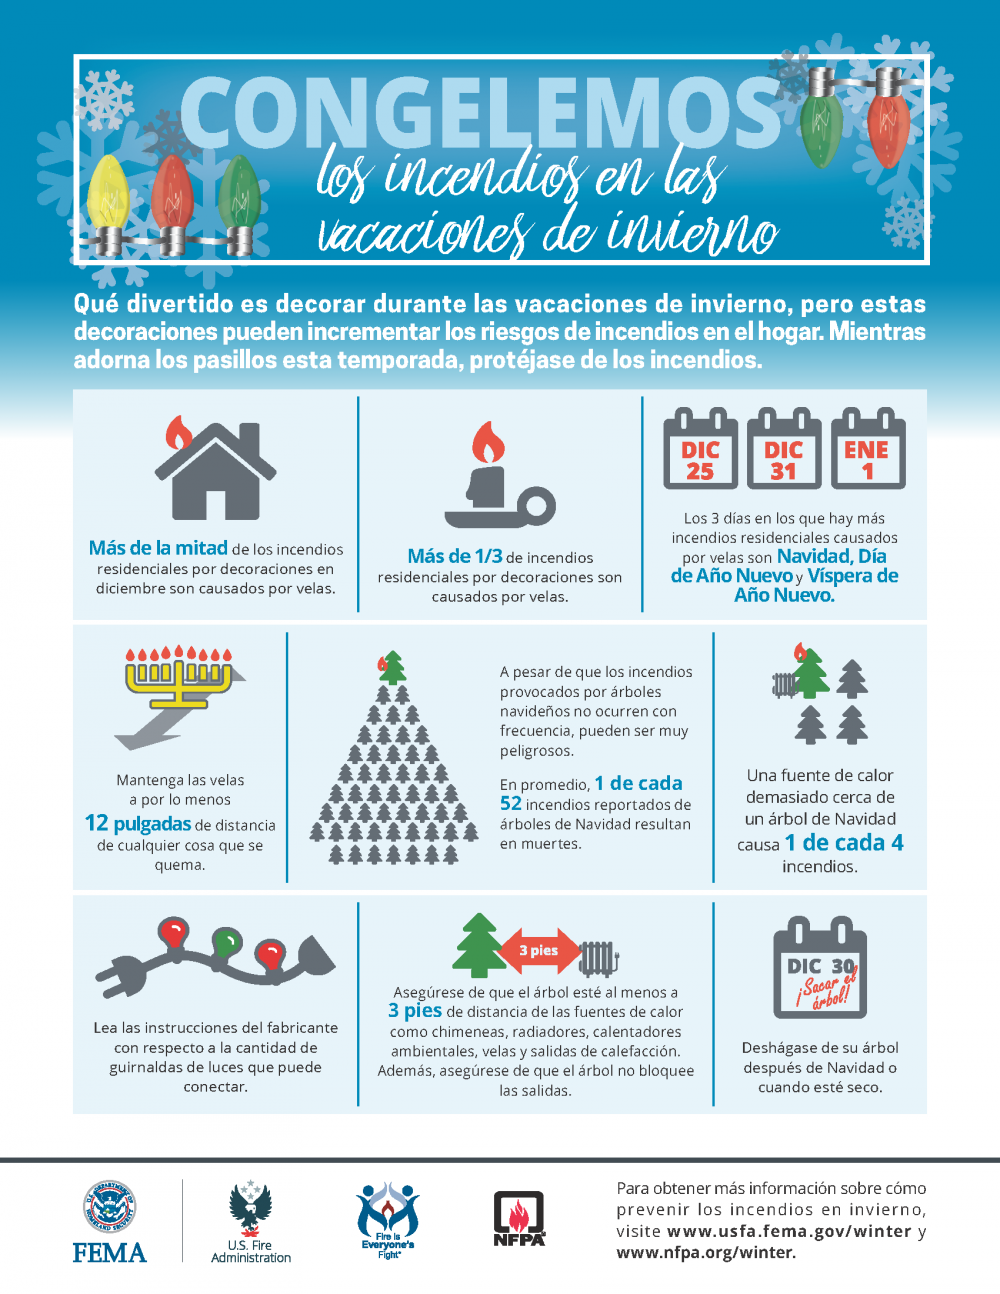 spanish fire safety infographic encouragin smart holiday candle and electronic usage